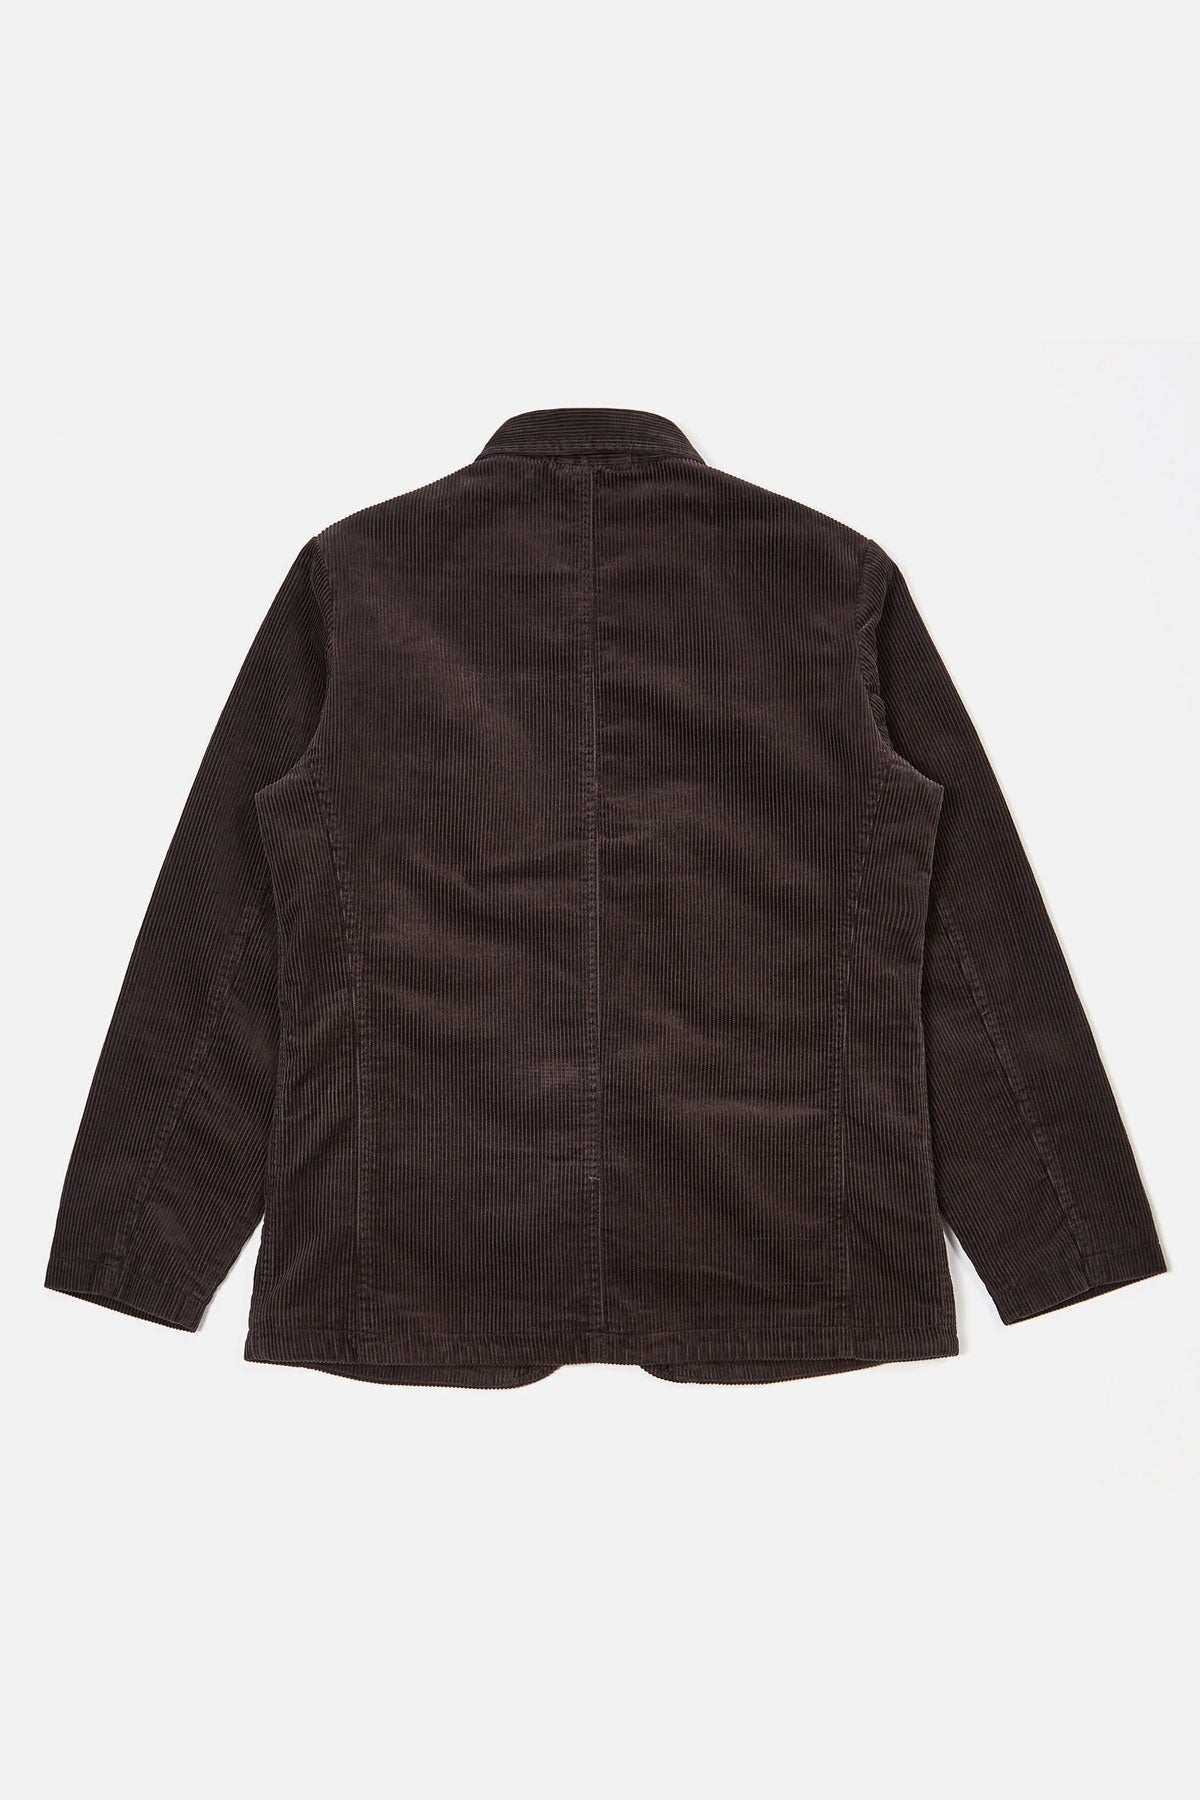 Universal Works - Bakers Jacket In Licorice Cord